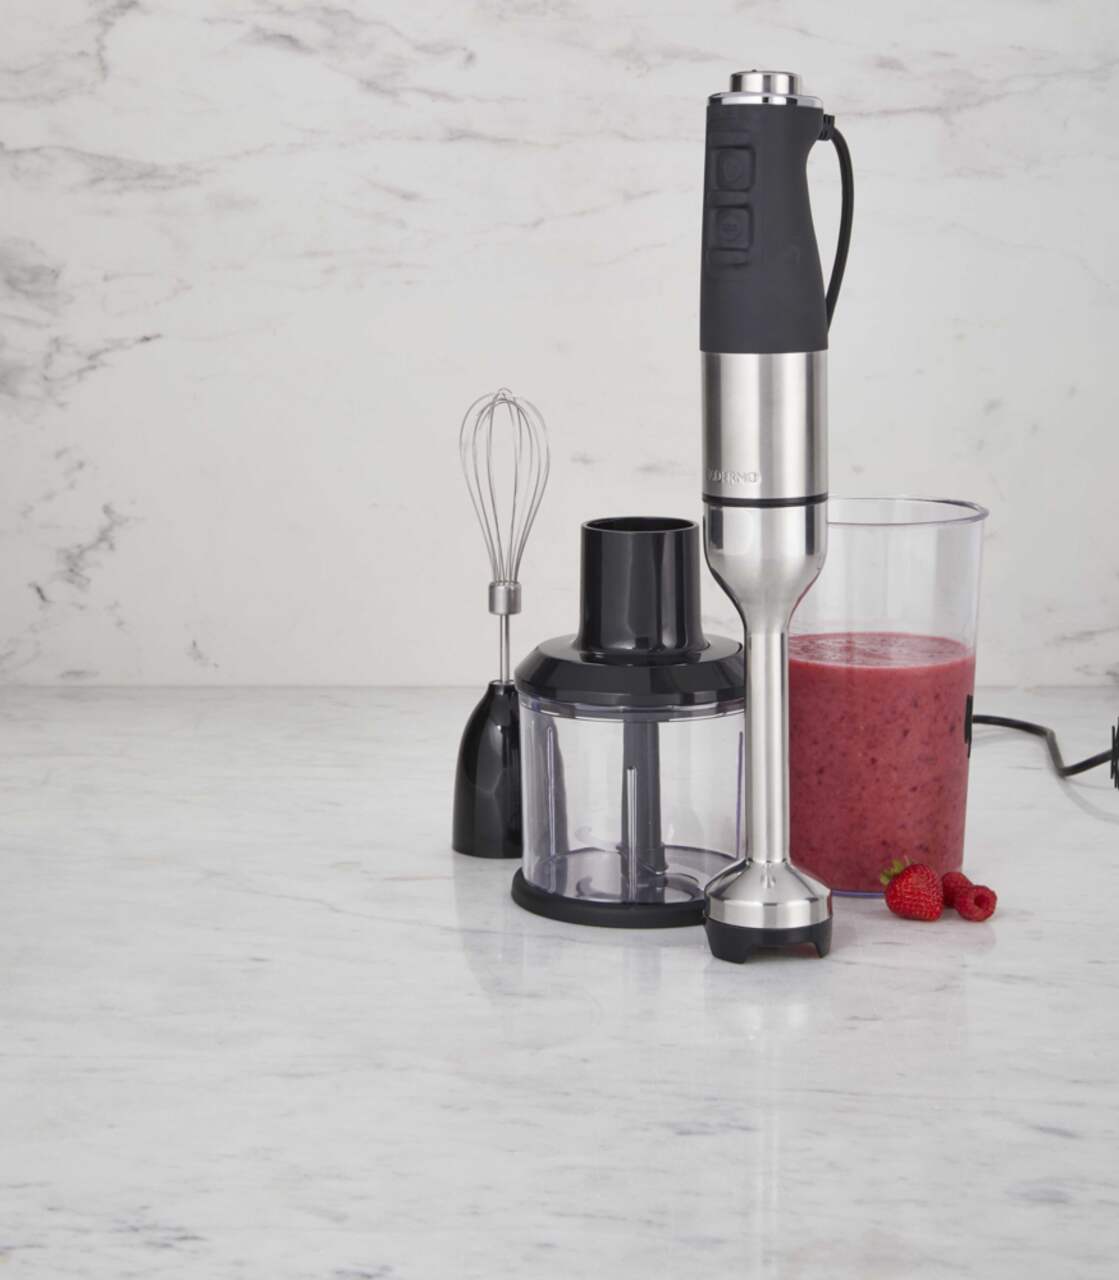 https://media-www.canadiantire.ca/product/living/kitchen/kitchen-appliances/0435270/paderno-variable-spd-immersion-blender-blk-stainless-steel-2461e231-4d16-4d36-853e-8213f38a9d33.png?imdensity=1&imwidth=1244&impolicy=mZoom